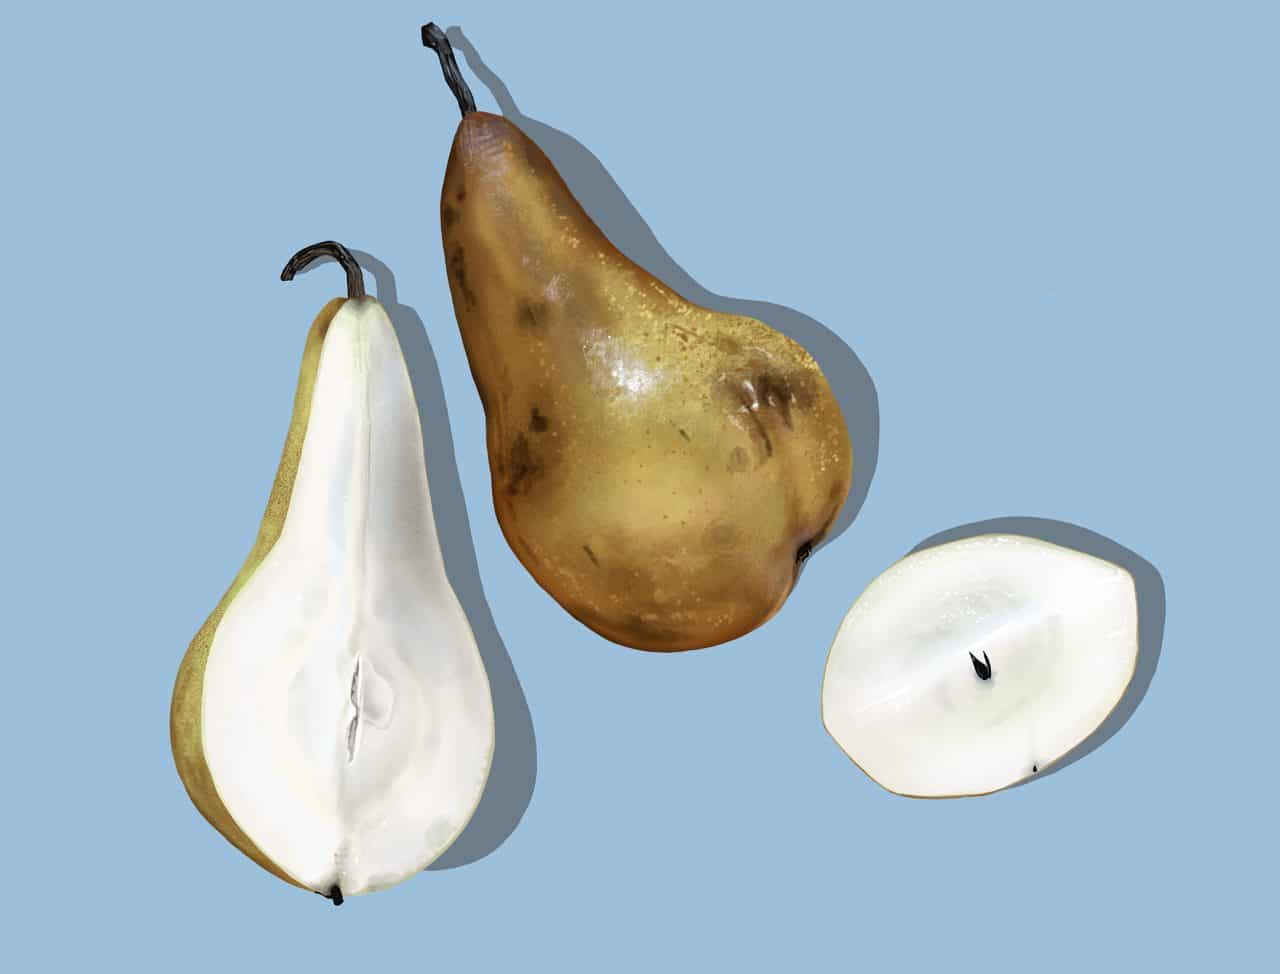 Toronto illustrator Mark Scheibmayr shares tips on how to draw pears.